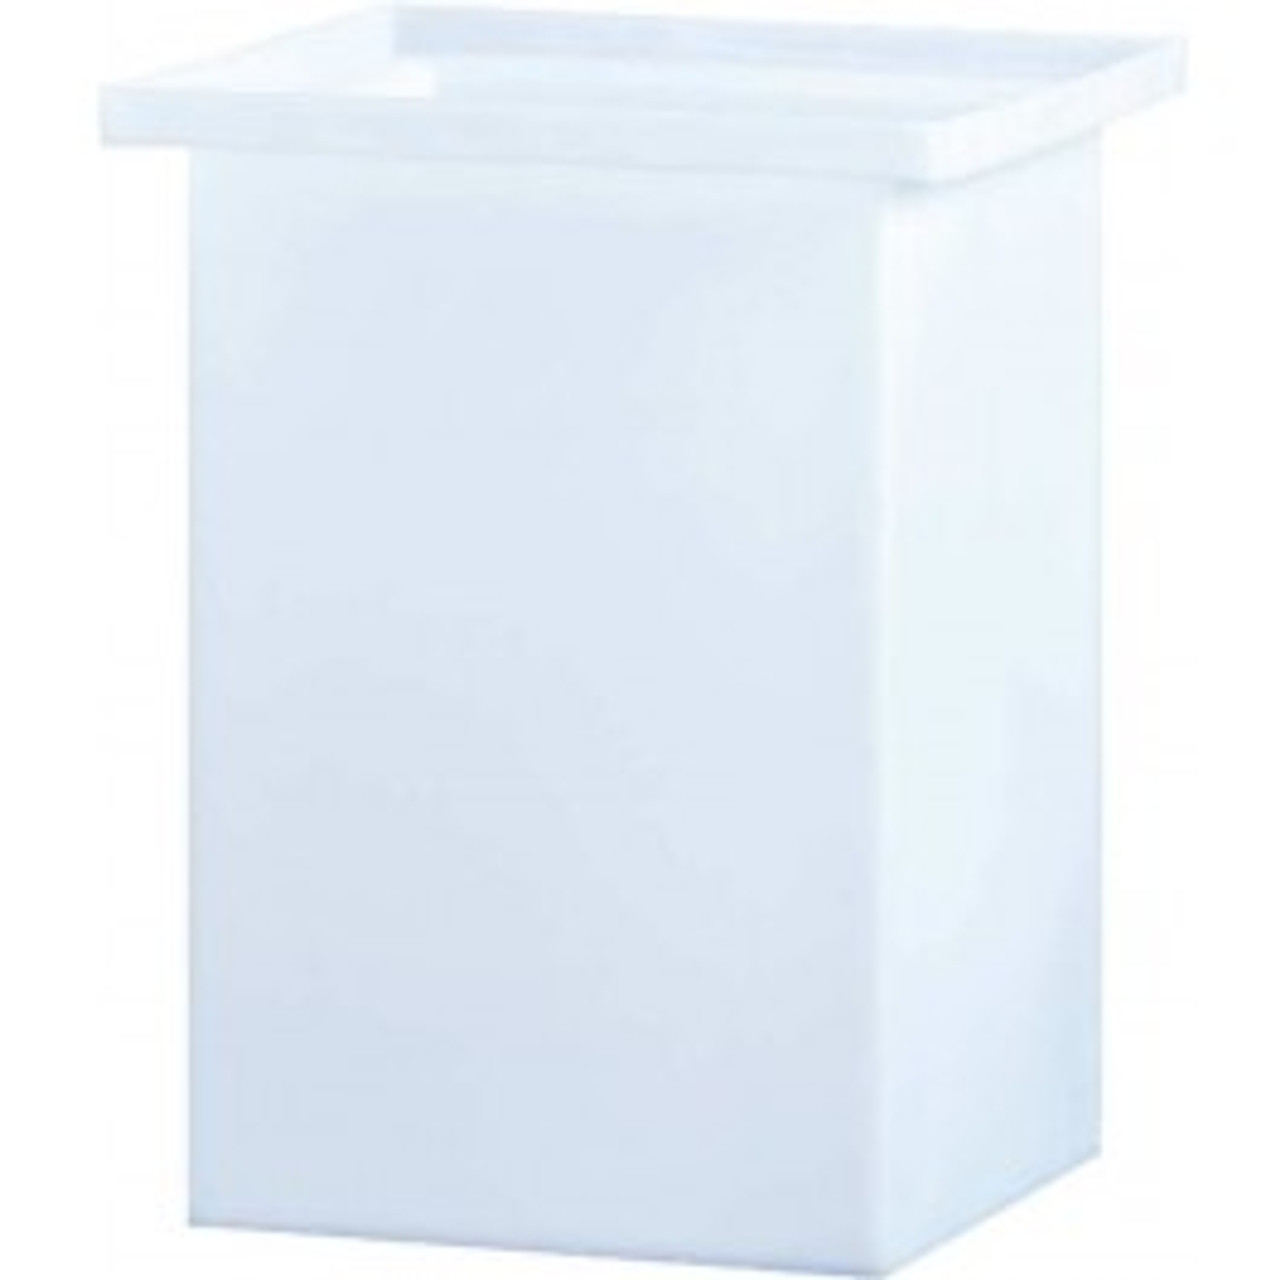 An image of a 12 Gallon PE Chem-Tainer White Rectangular Open Top Tank | R240430A